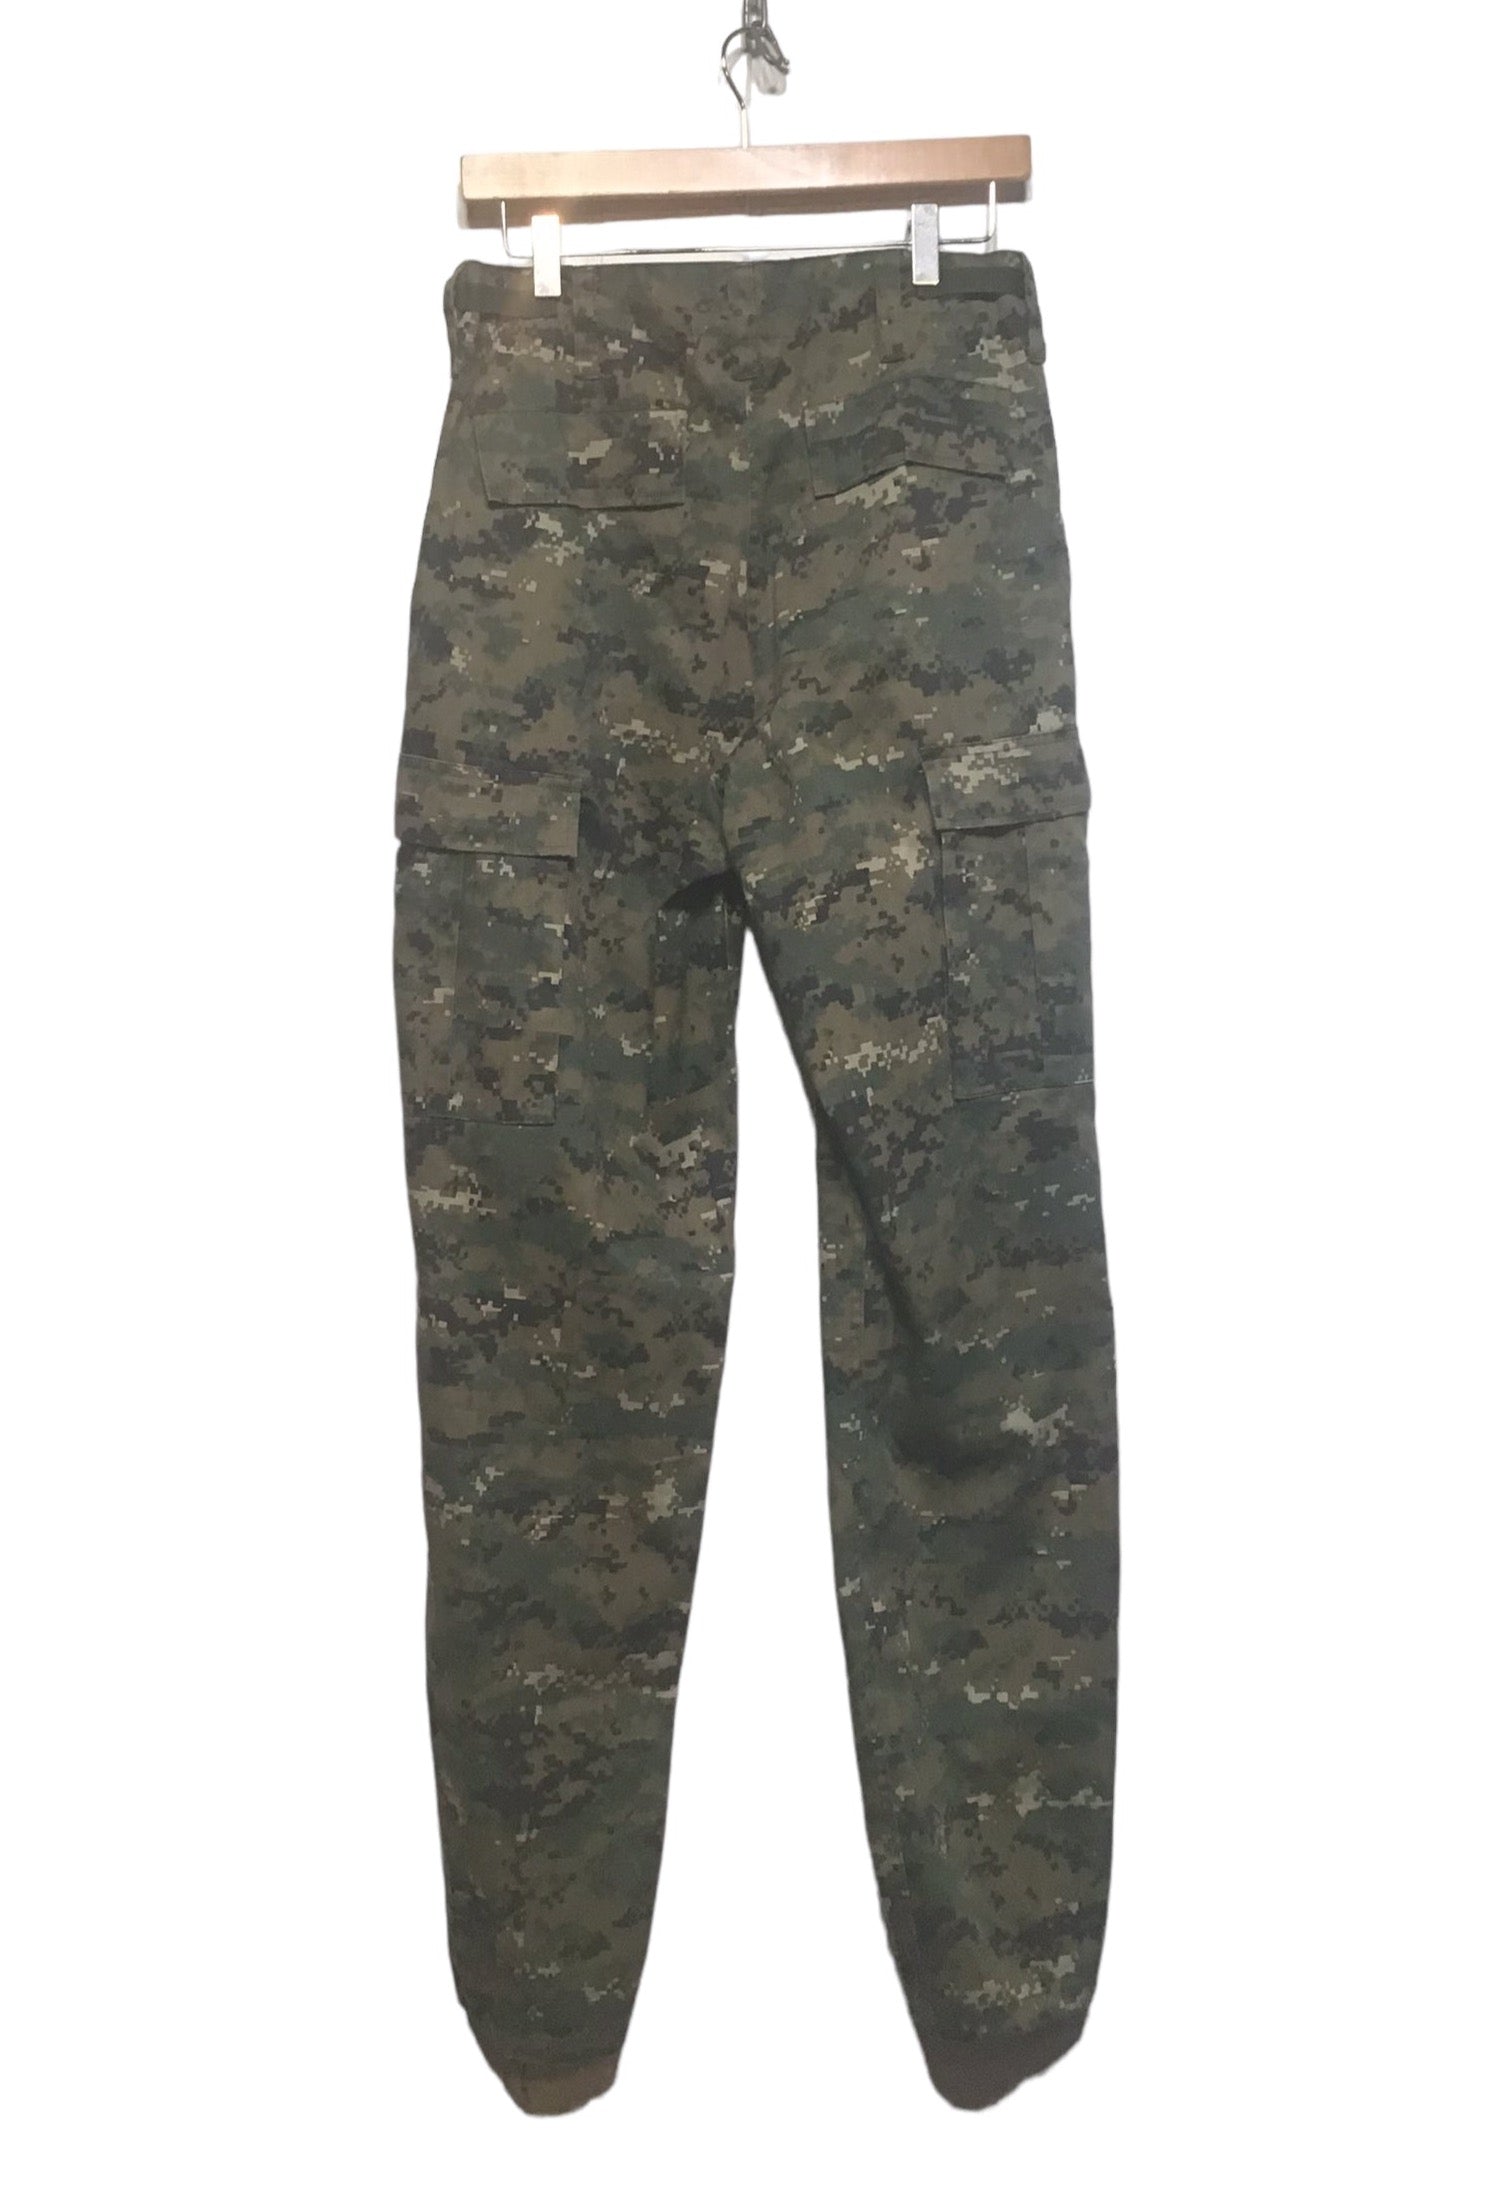 Authorized Pattern Indian Army Combat Uniform Trouser – Olive Planet